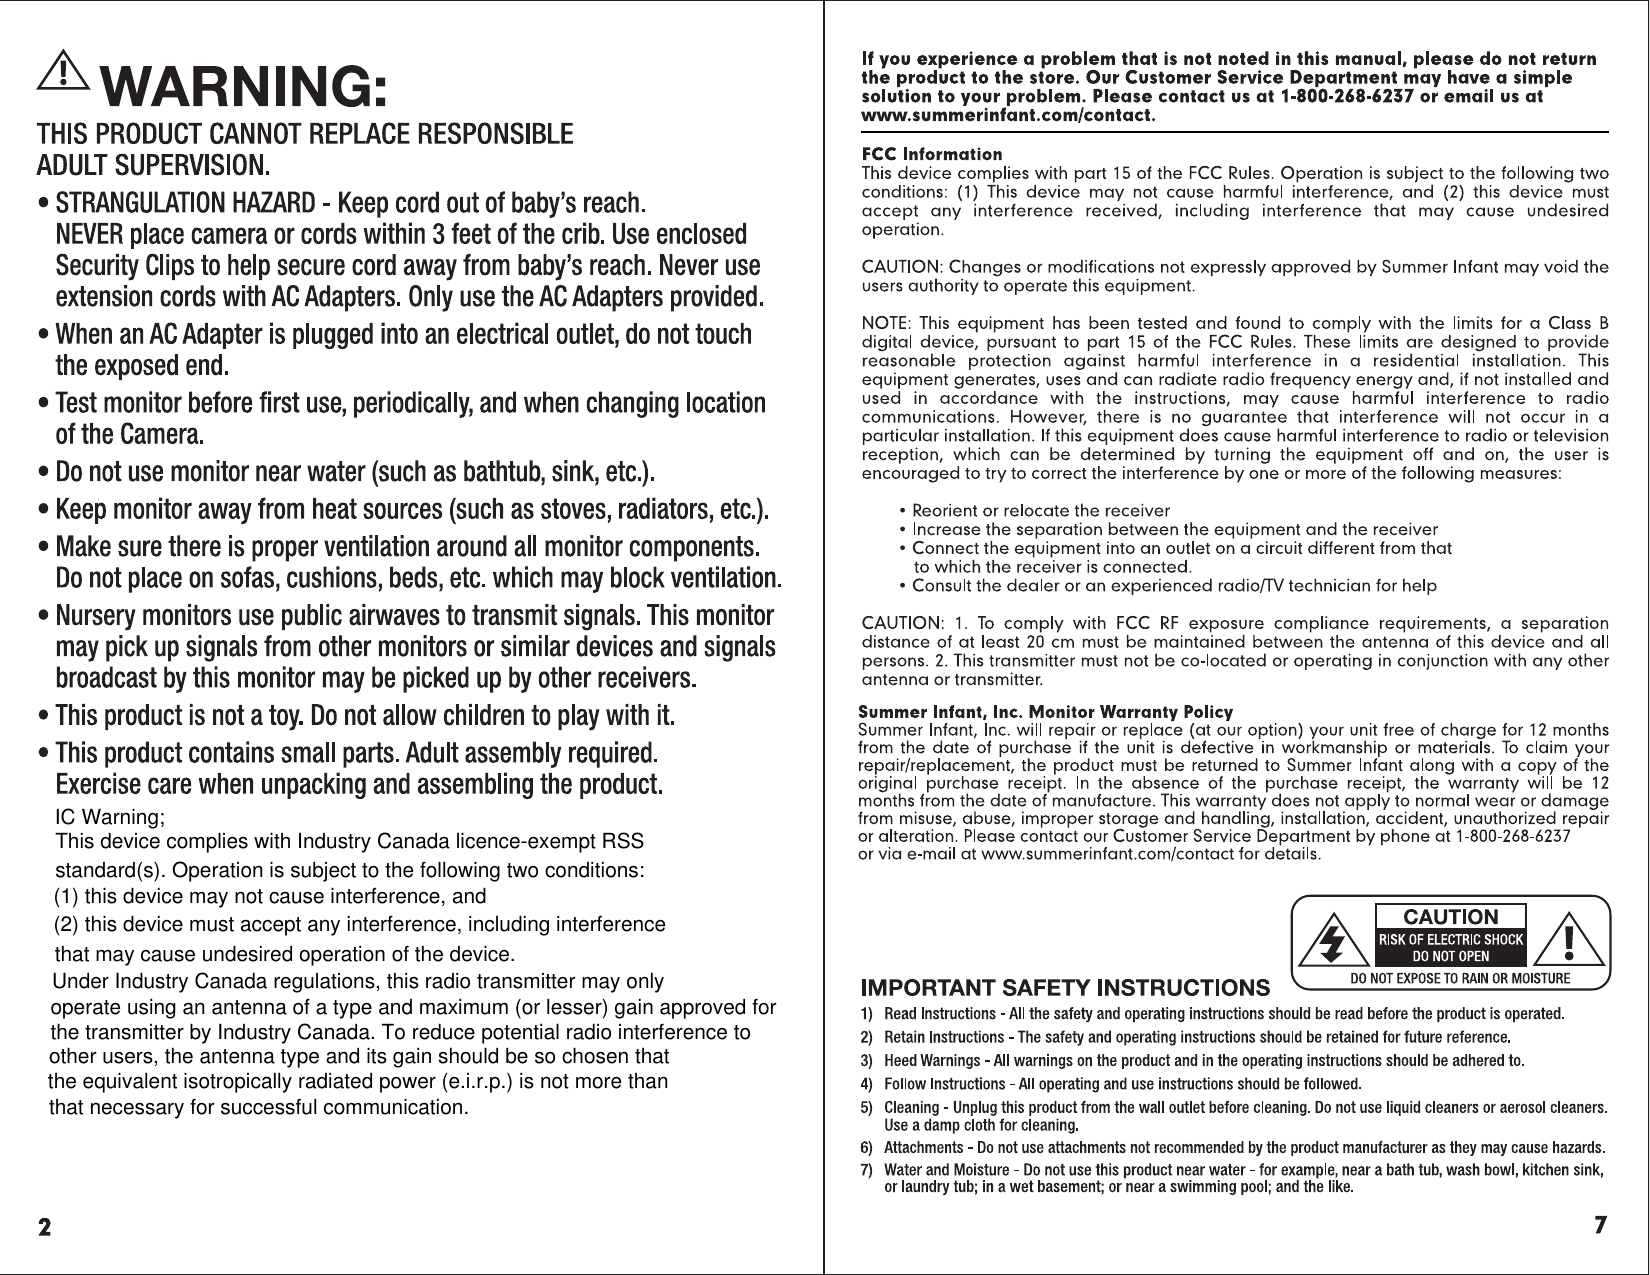 IC Warning;This device complies with Industry Canada licence-exempt RSS standard(s). Operation is subject to the following two conditions: (1) this device may not cause interference, and (2) this device must accept any interference, including interference that may cause undesired operation of the device.Under Industry Canada regulations, this radio transmitter may only operate using an antenna of a type and maximum (or lesser) gain approved for the transmitter by Industry Canada. To reduce potential radio interference to other users, the antenna type and its gain should be so chosen that the equivalent isotropically radiated power (e.i.r.p.) is not more than that necessary for successful communication.